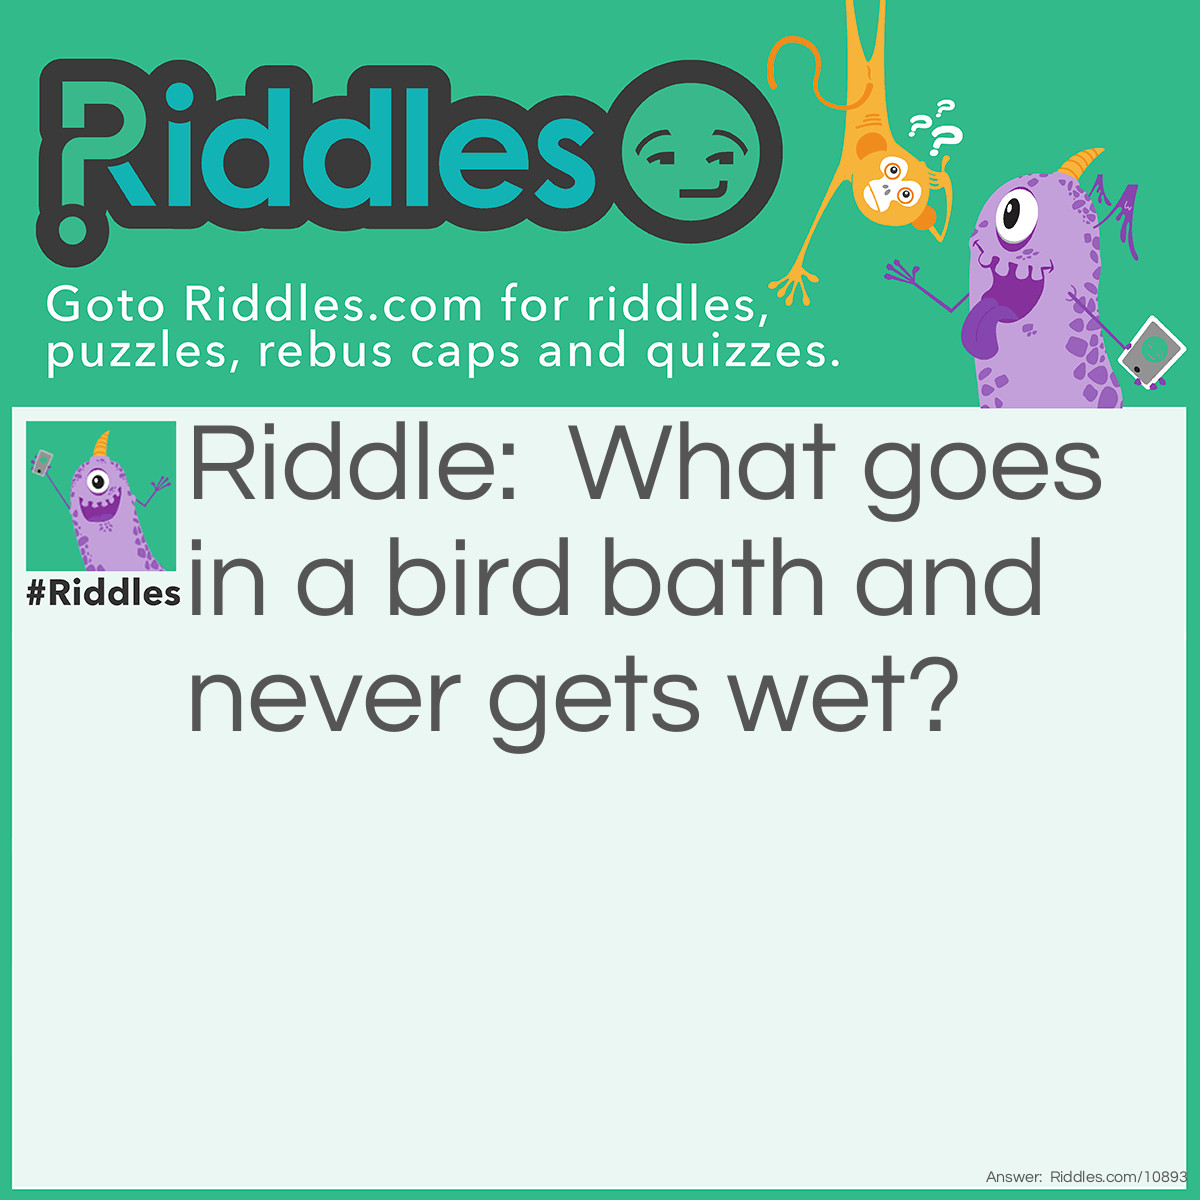 Riddle: What goes in a bird bath and never gets wet? Answer: Either the birds reflection or the birds shadow --Either one works